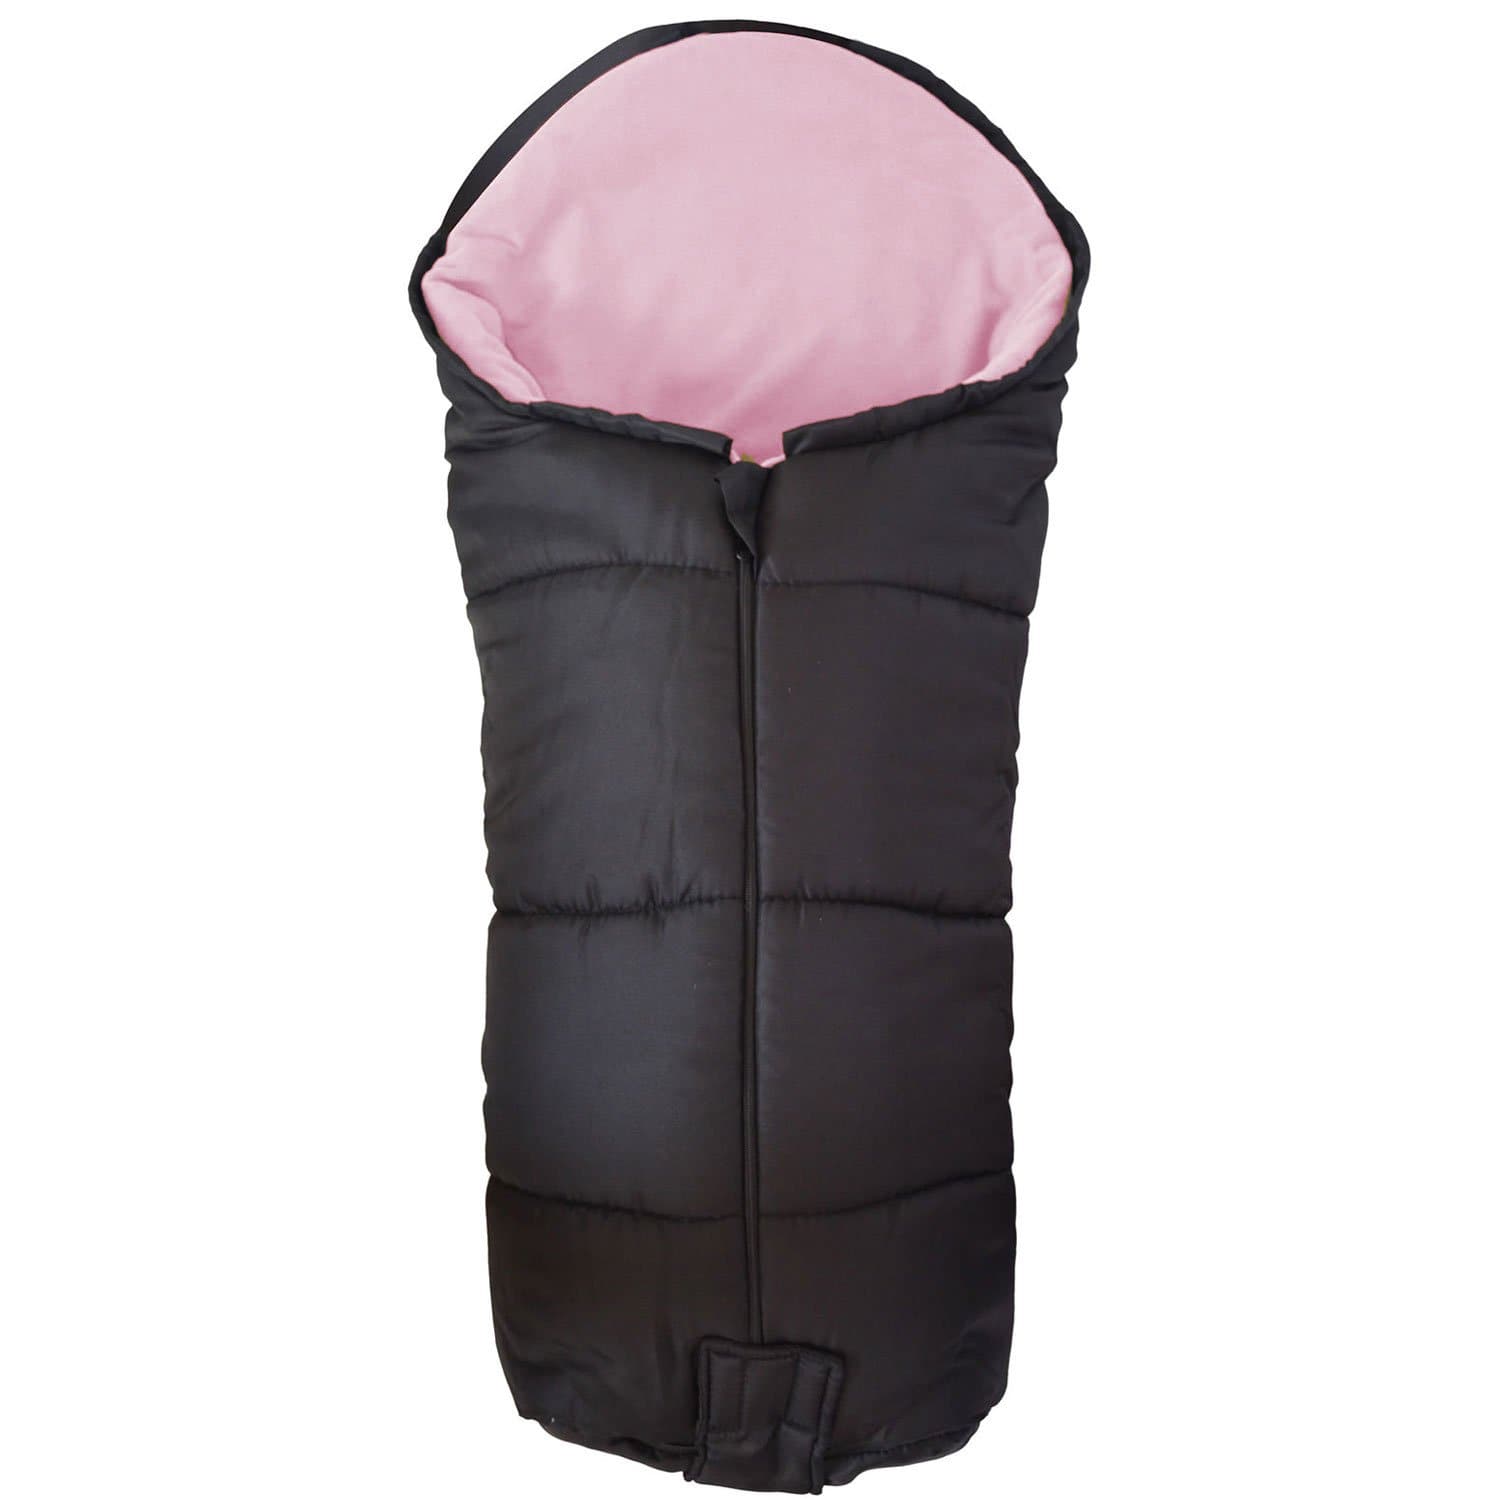 Deluxe Footmuff / Cosy Toes Compatible with Babyzen - For Your Little One